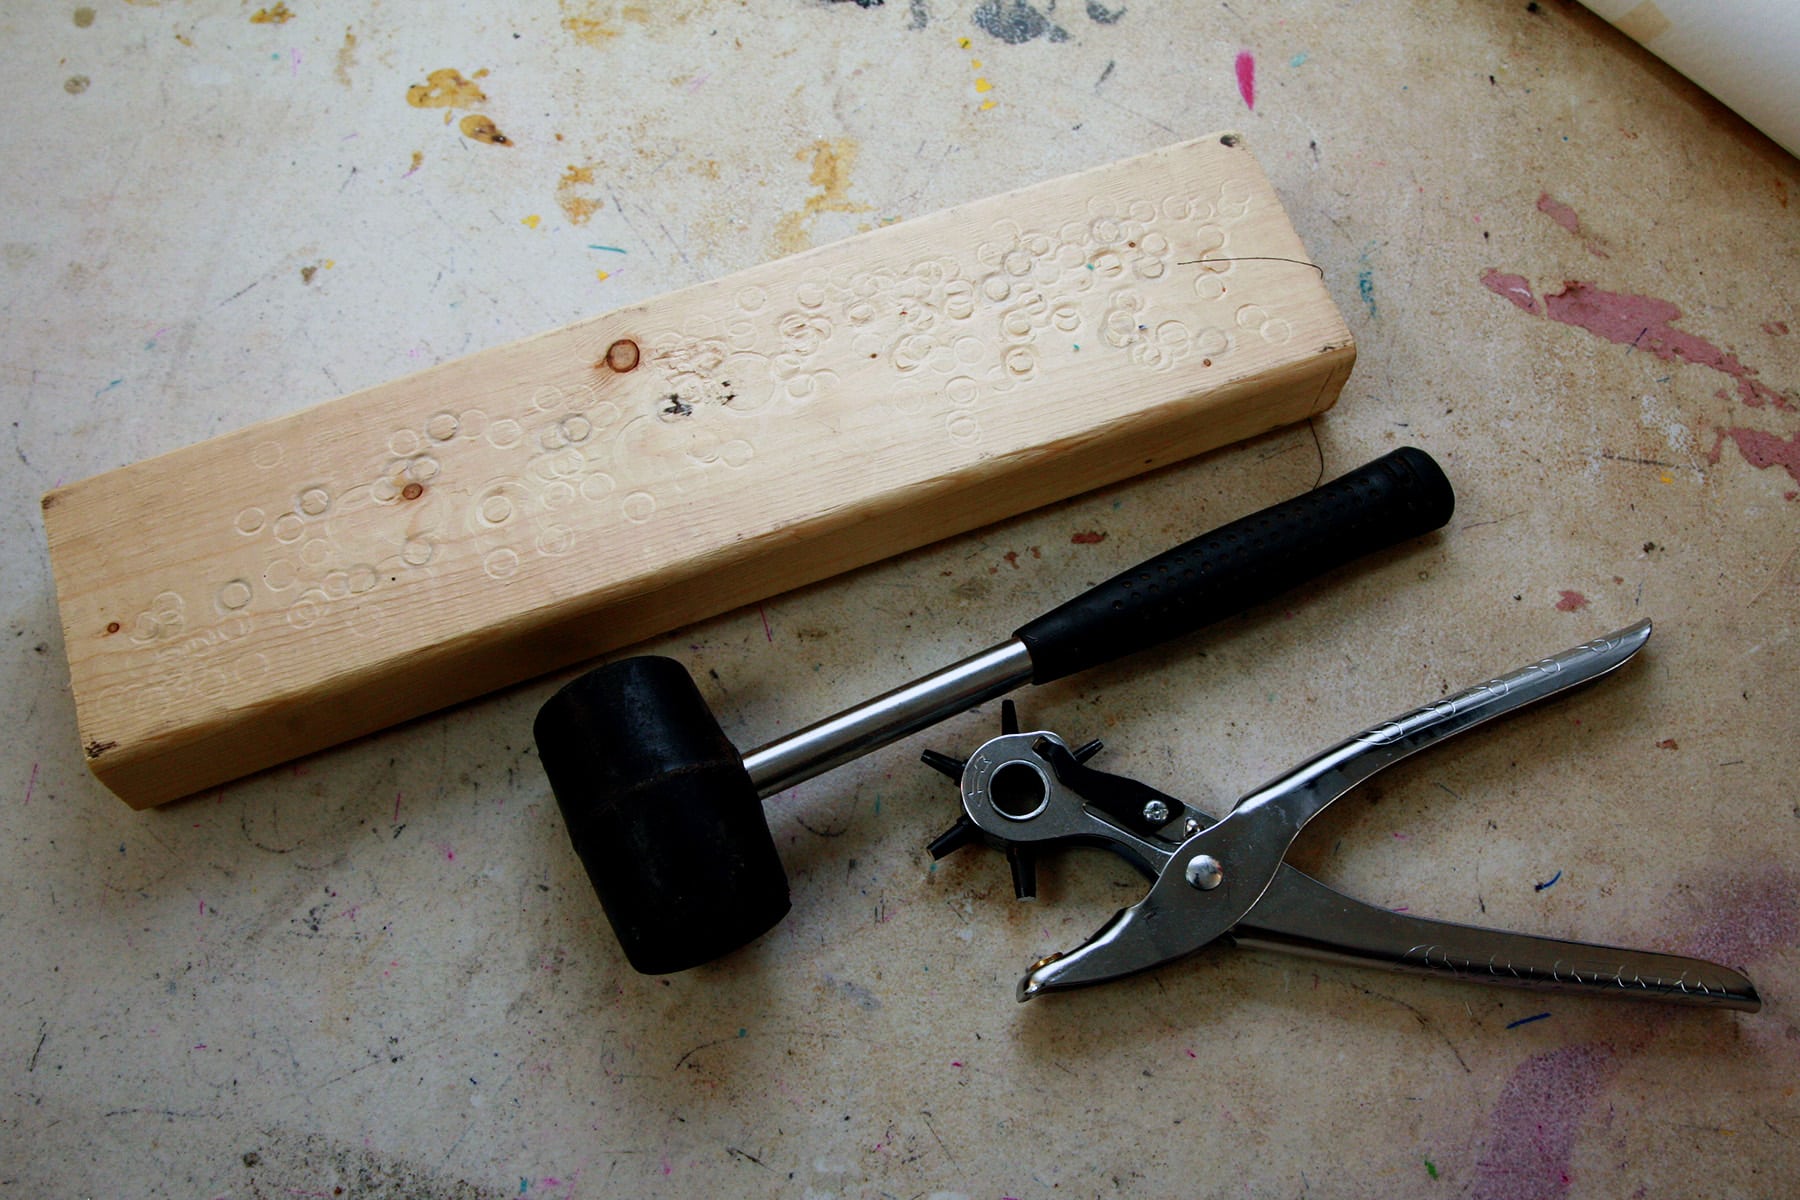 A block of wood, a rubber mallet, and an eyelet punch.